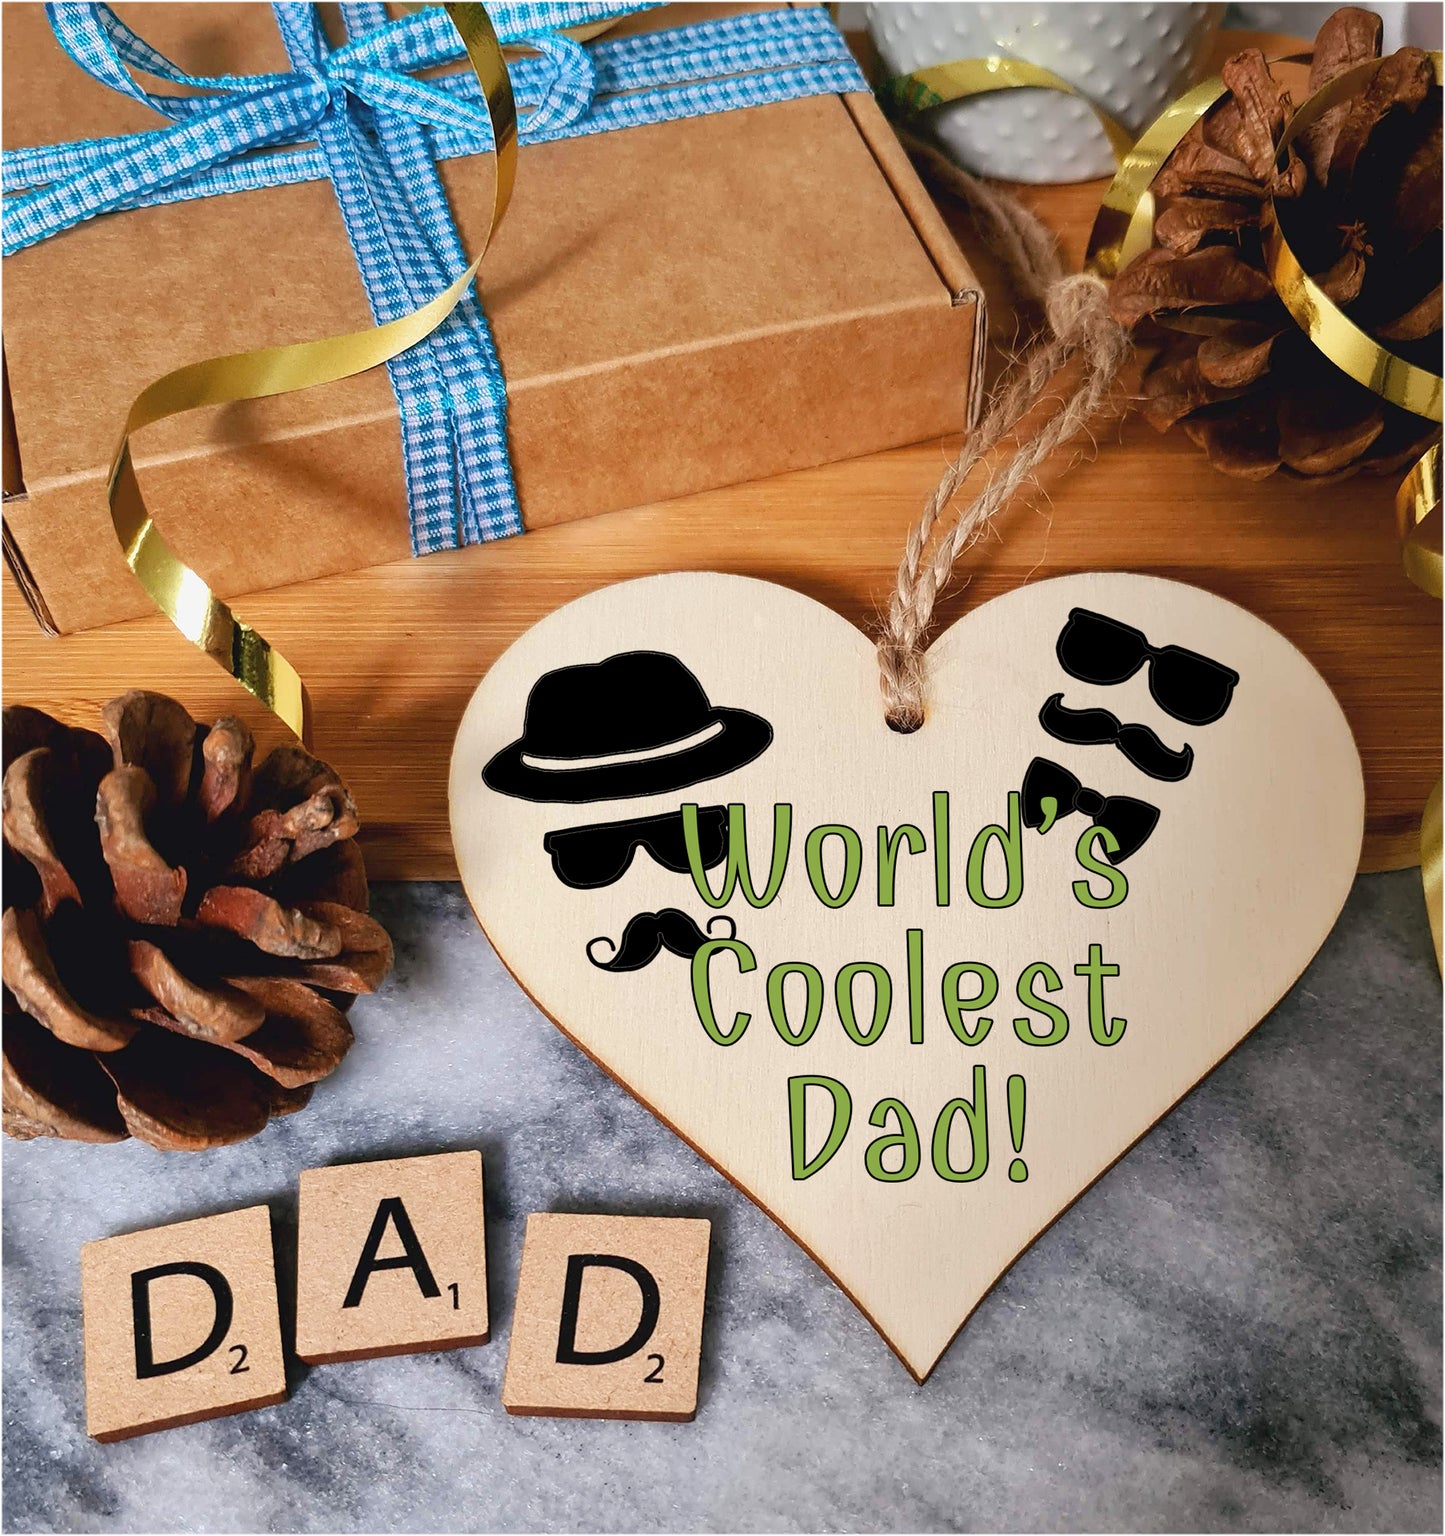 Handmade Wooden Hanging Heart Plaque Gift for Dad this Fathers Day Novelty Fun Thoughtful Keepsake